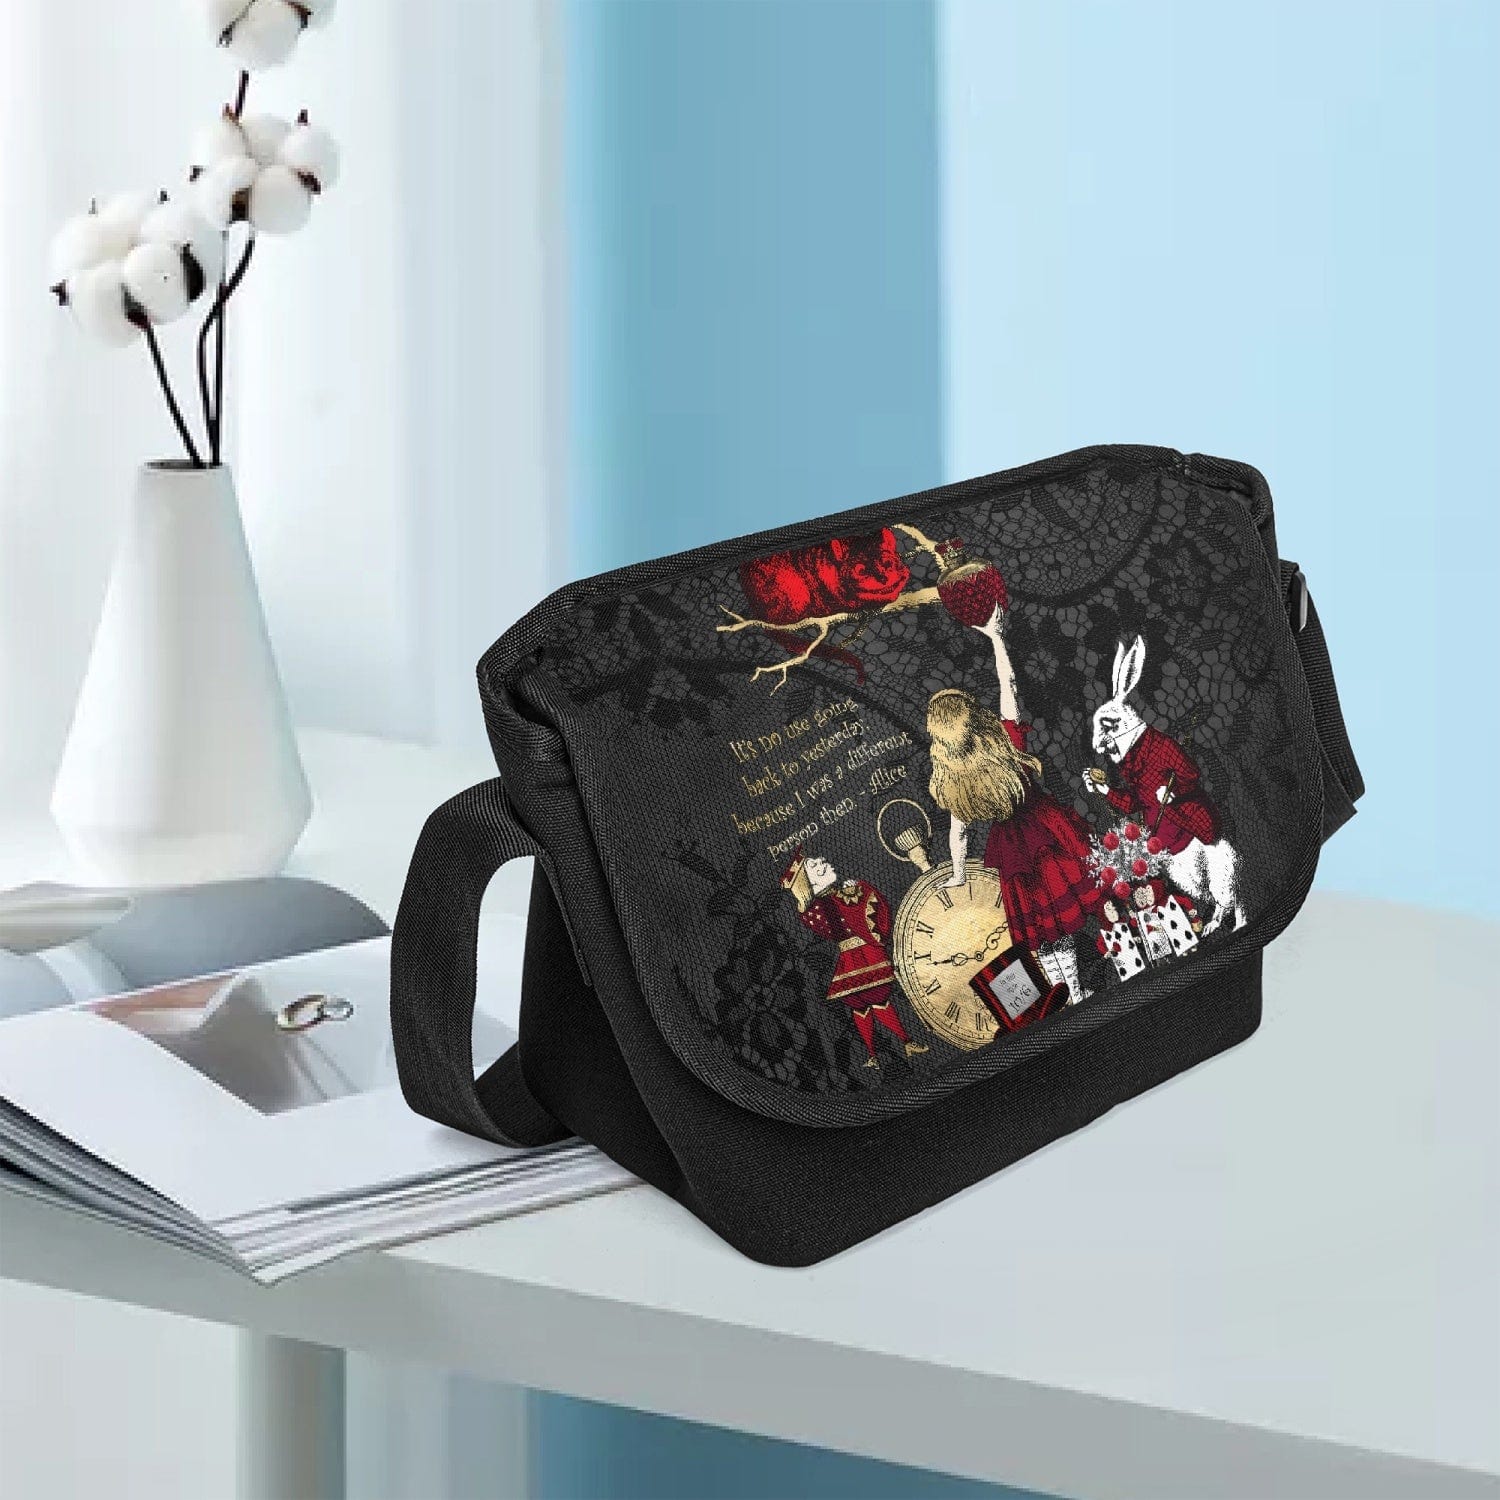 gothic Alice in Wonderland Messenger Bag made from canvas with a gothic gold, red and white Alice in Wonderland character print against a black lace print background, shown at a waiting room office